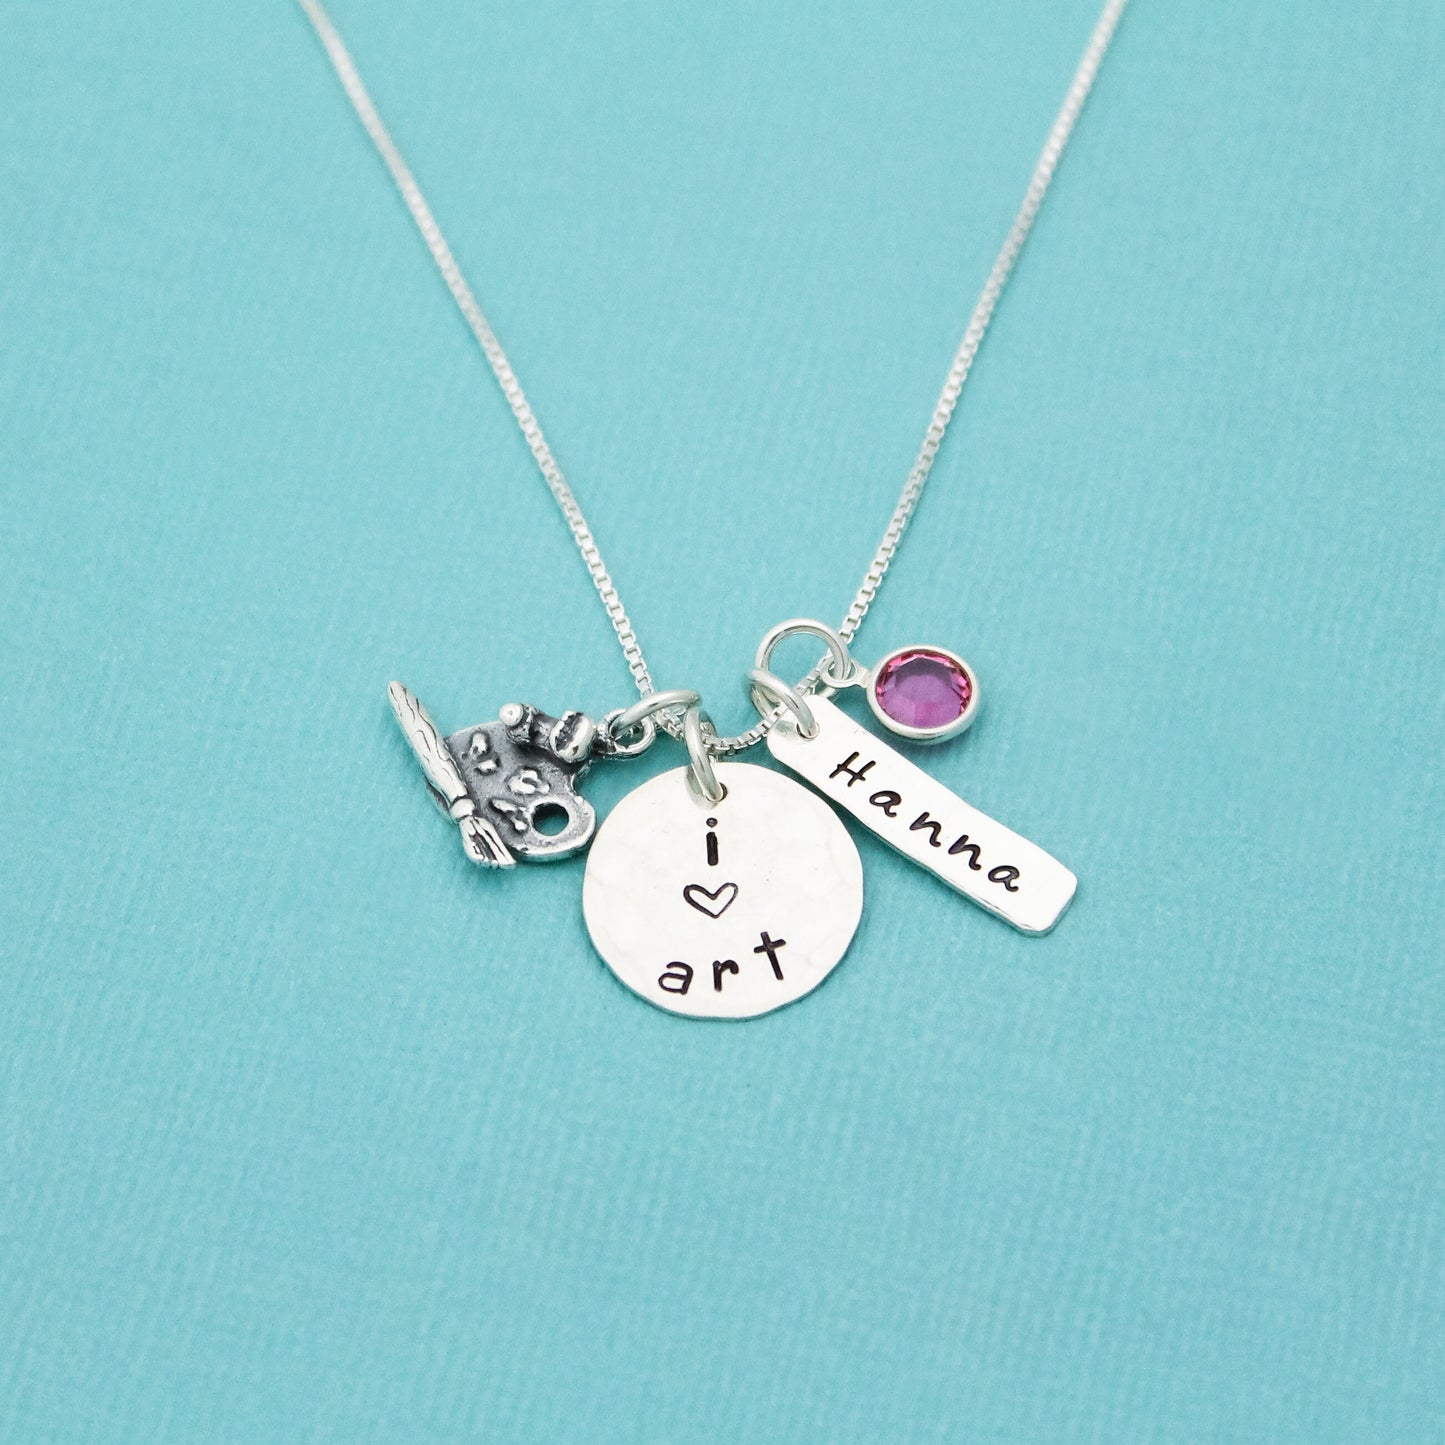 Personalized Artist Necklace, I Love Art Necklace, Gift for Artist, Art Teacher Gift, Artist Jewelry, Painter Necklace, Hand Stamped Jewelry